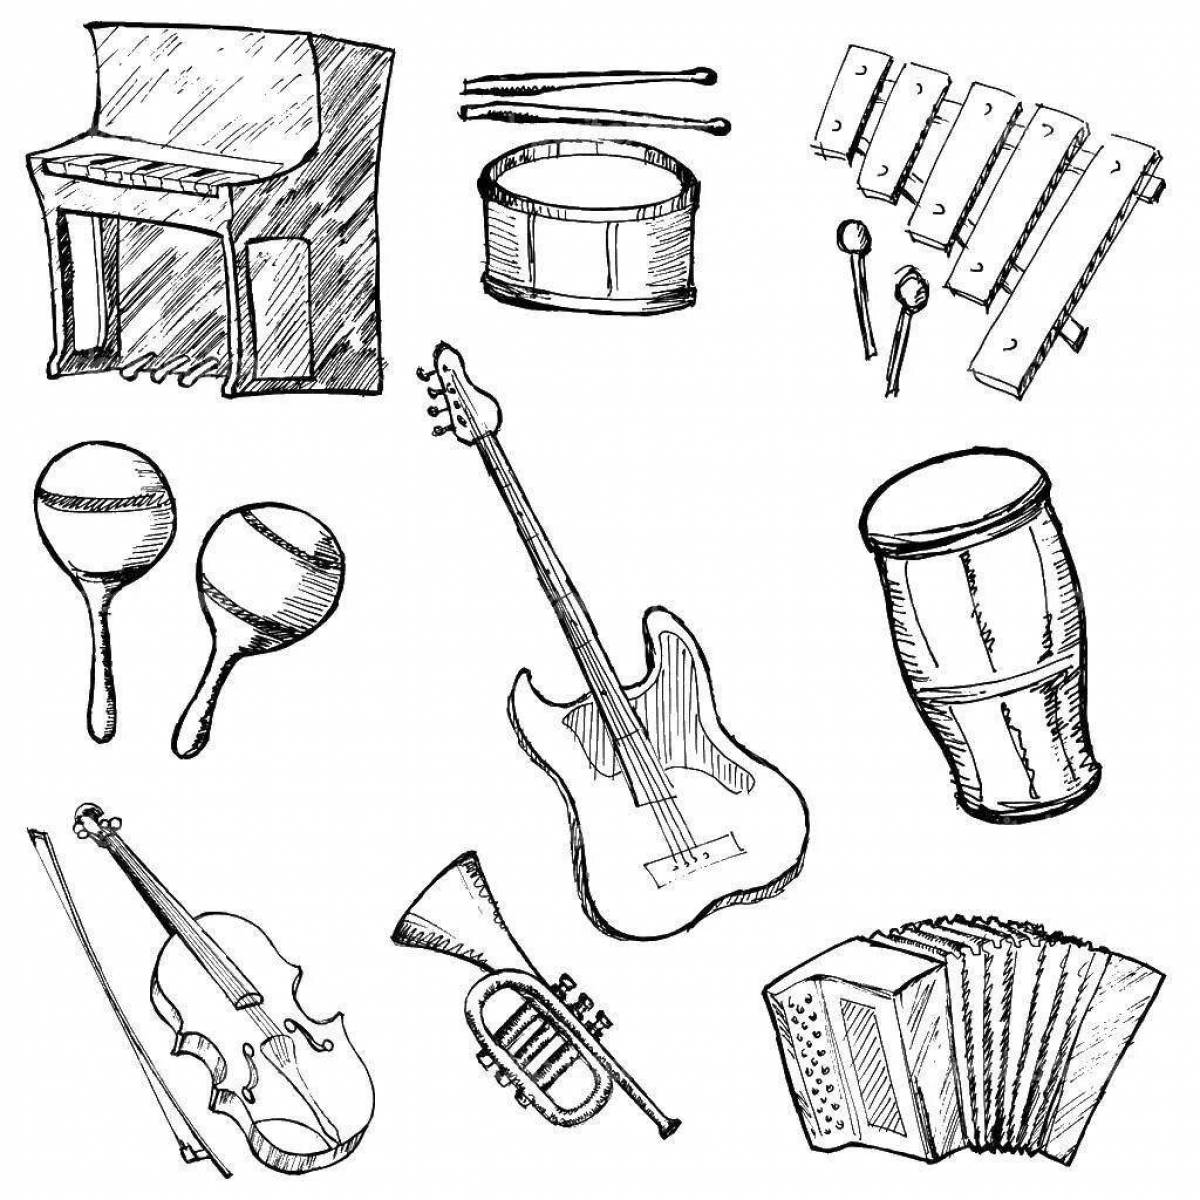 Amazing folk musical instruments coloring pages for kids